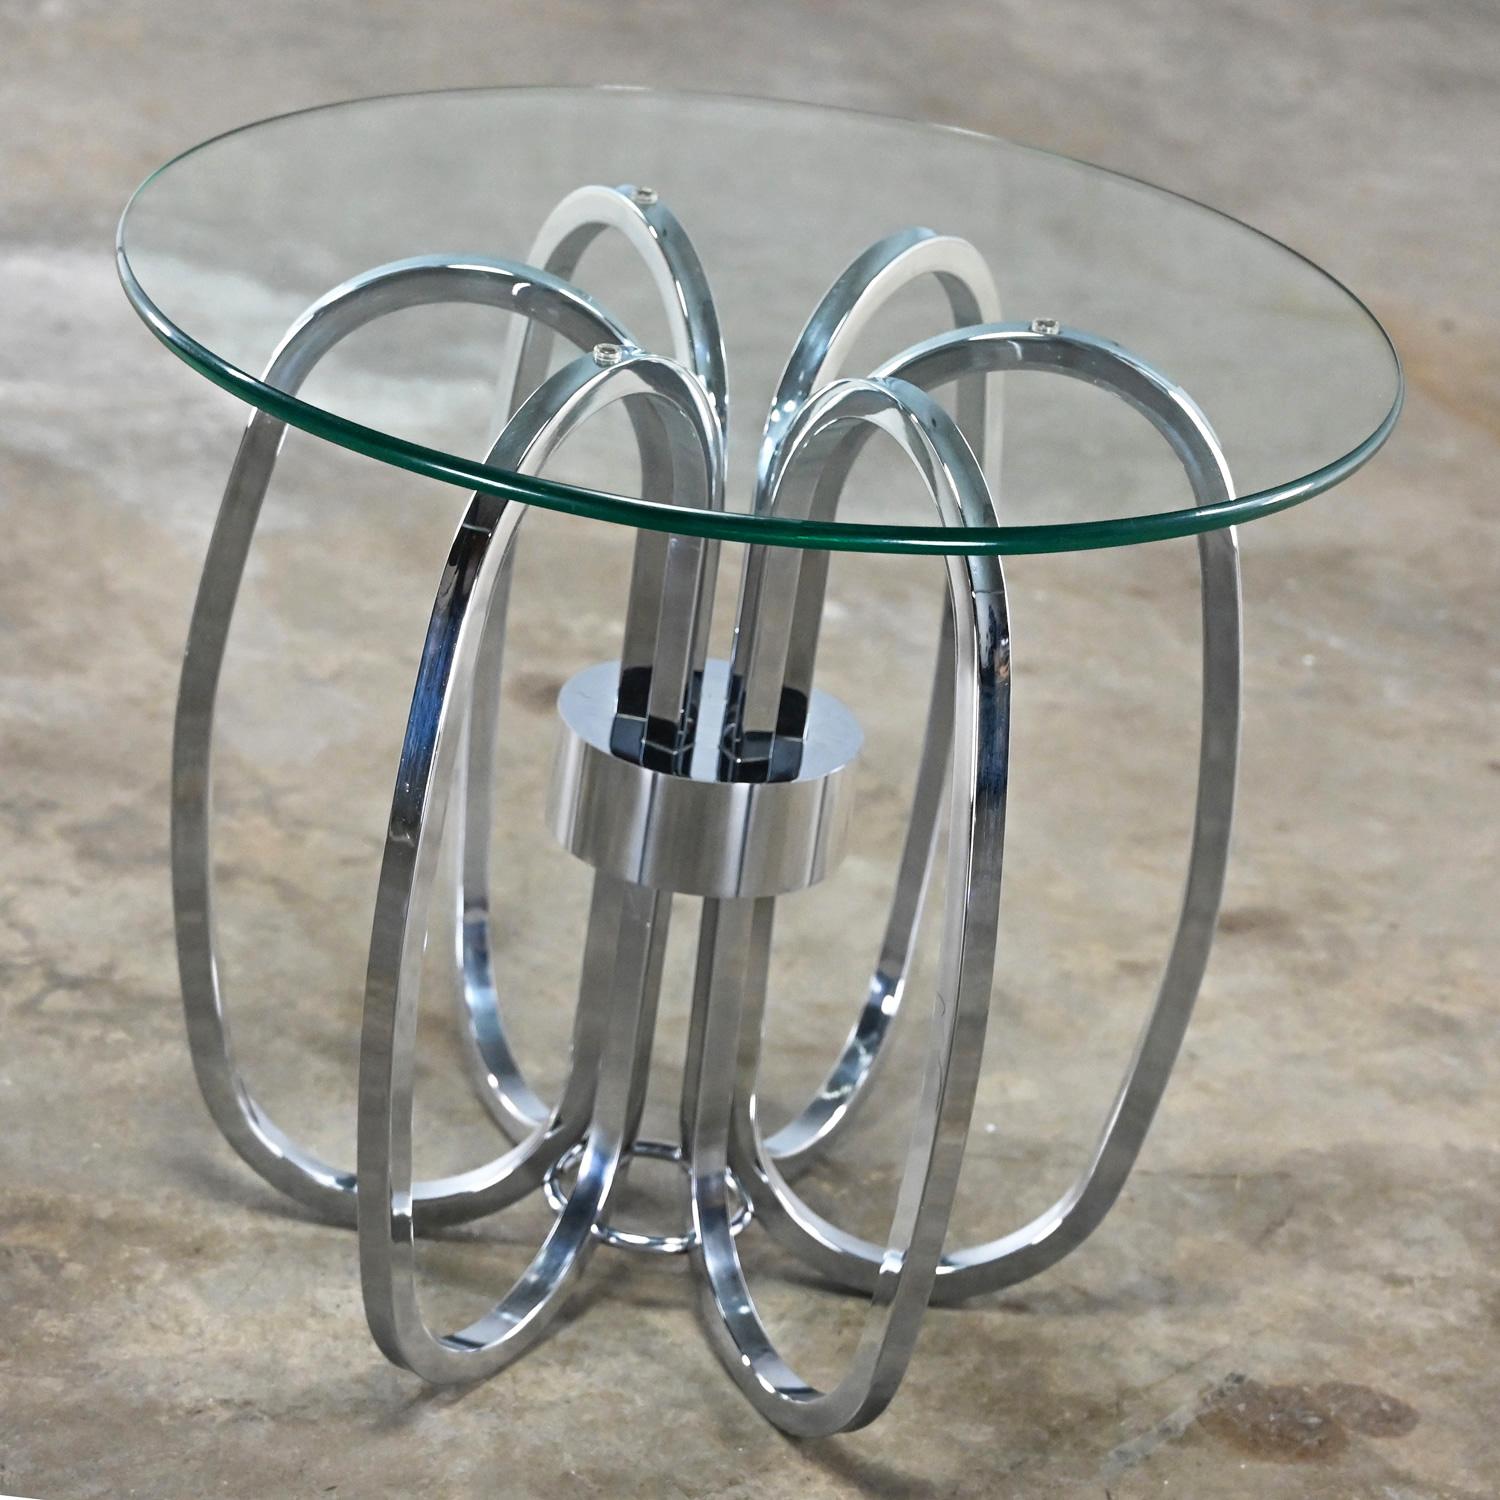 Marvelous vintage Mid-Century Modern to Modern end or side table with barrel shaped square chrome tube base & round glass top. Beautiful condition, keeping in mind that this is vintage and not new so will have signs of use and wear even if it has